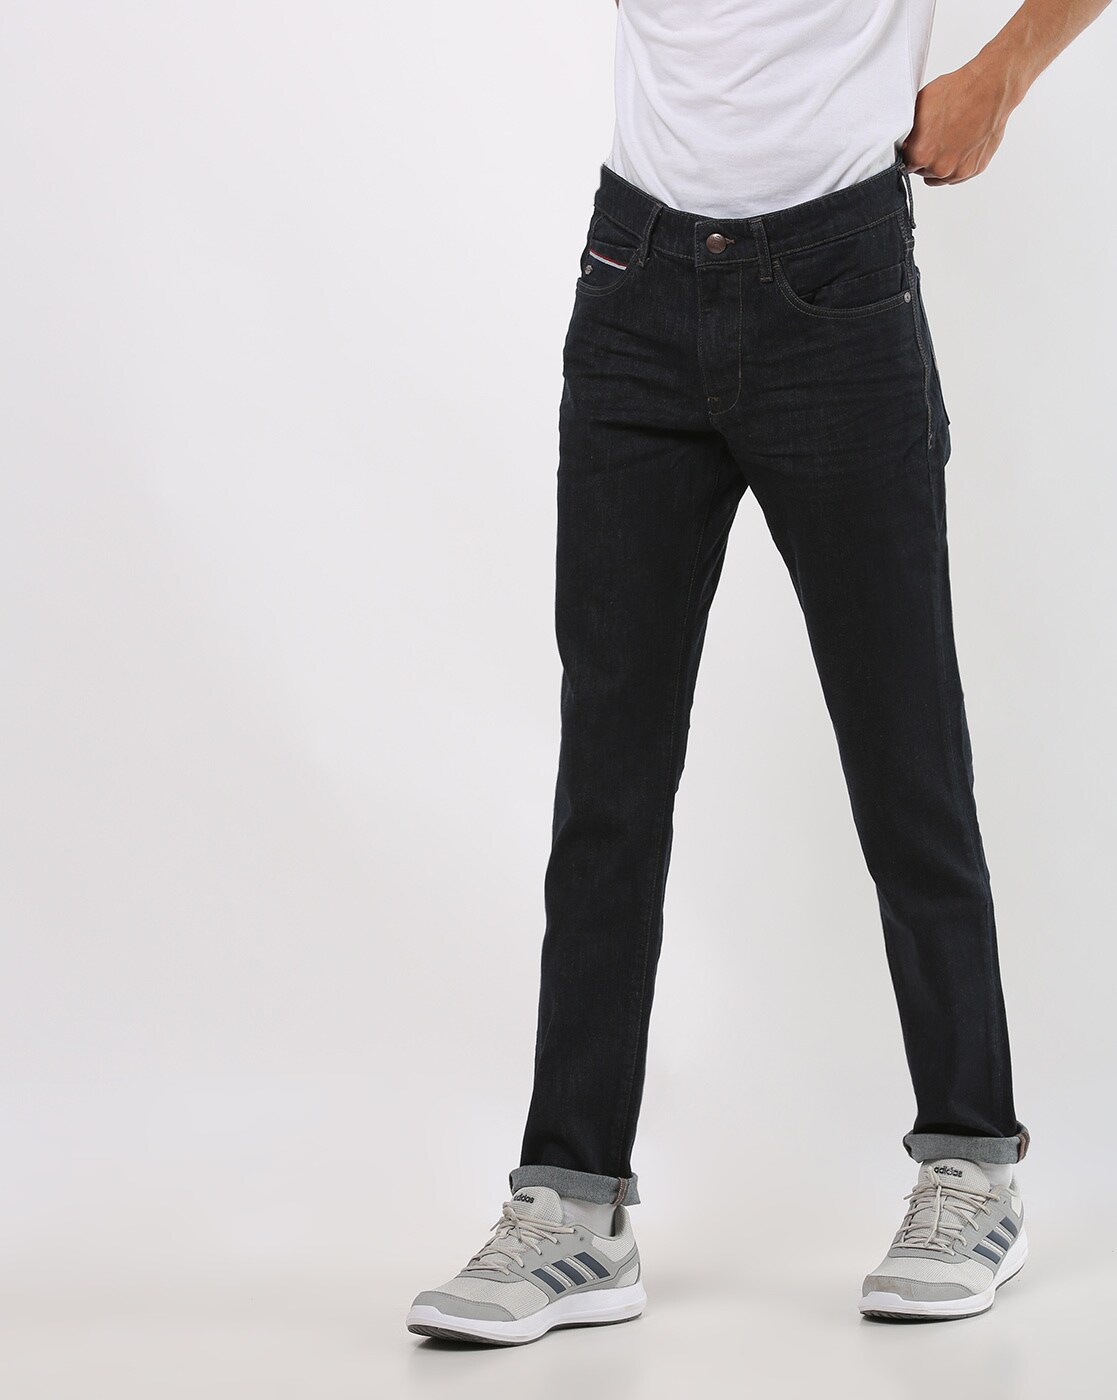 polo fit jeans online